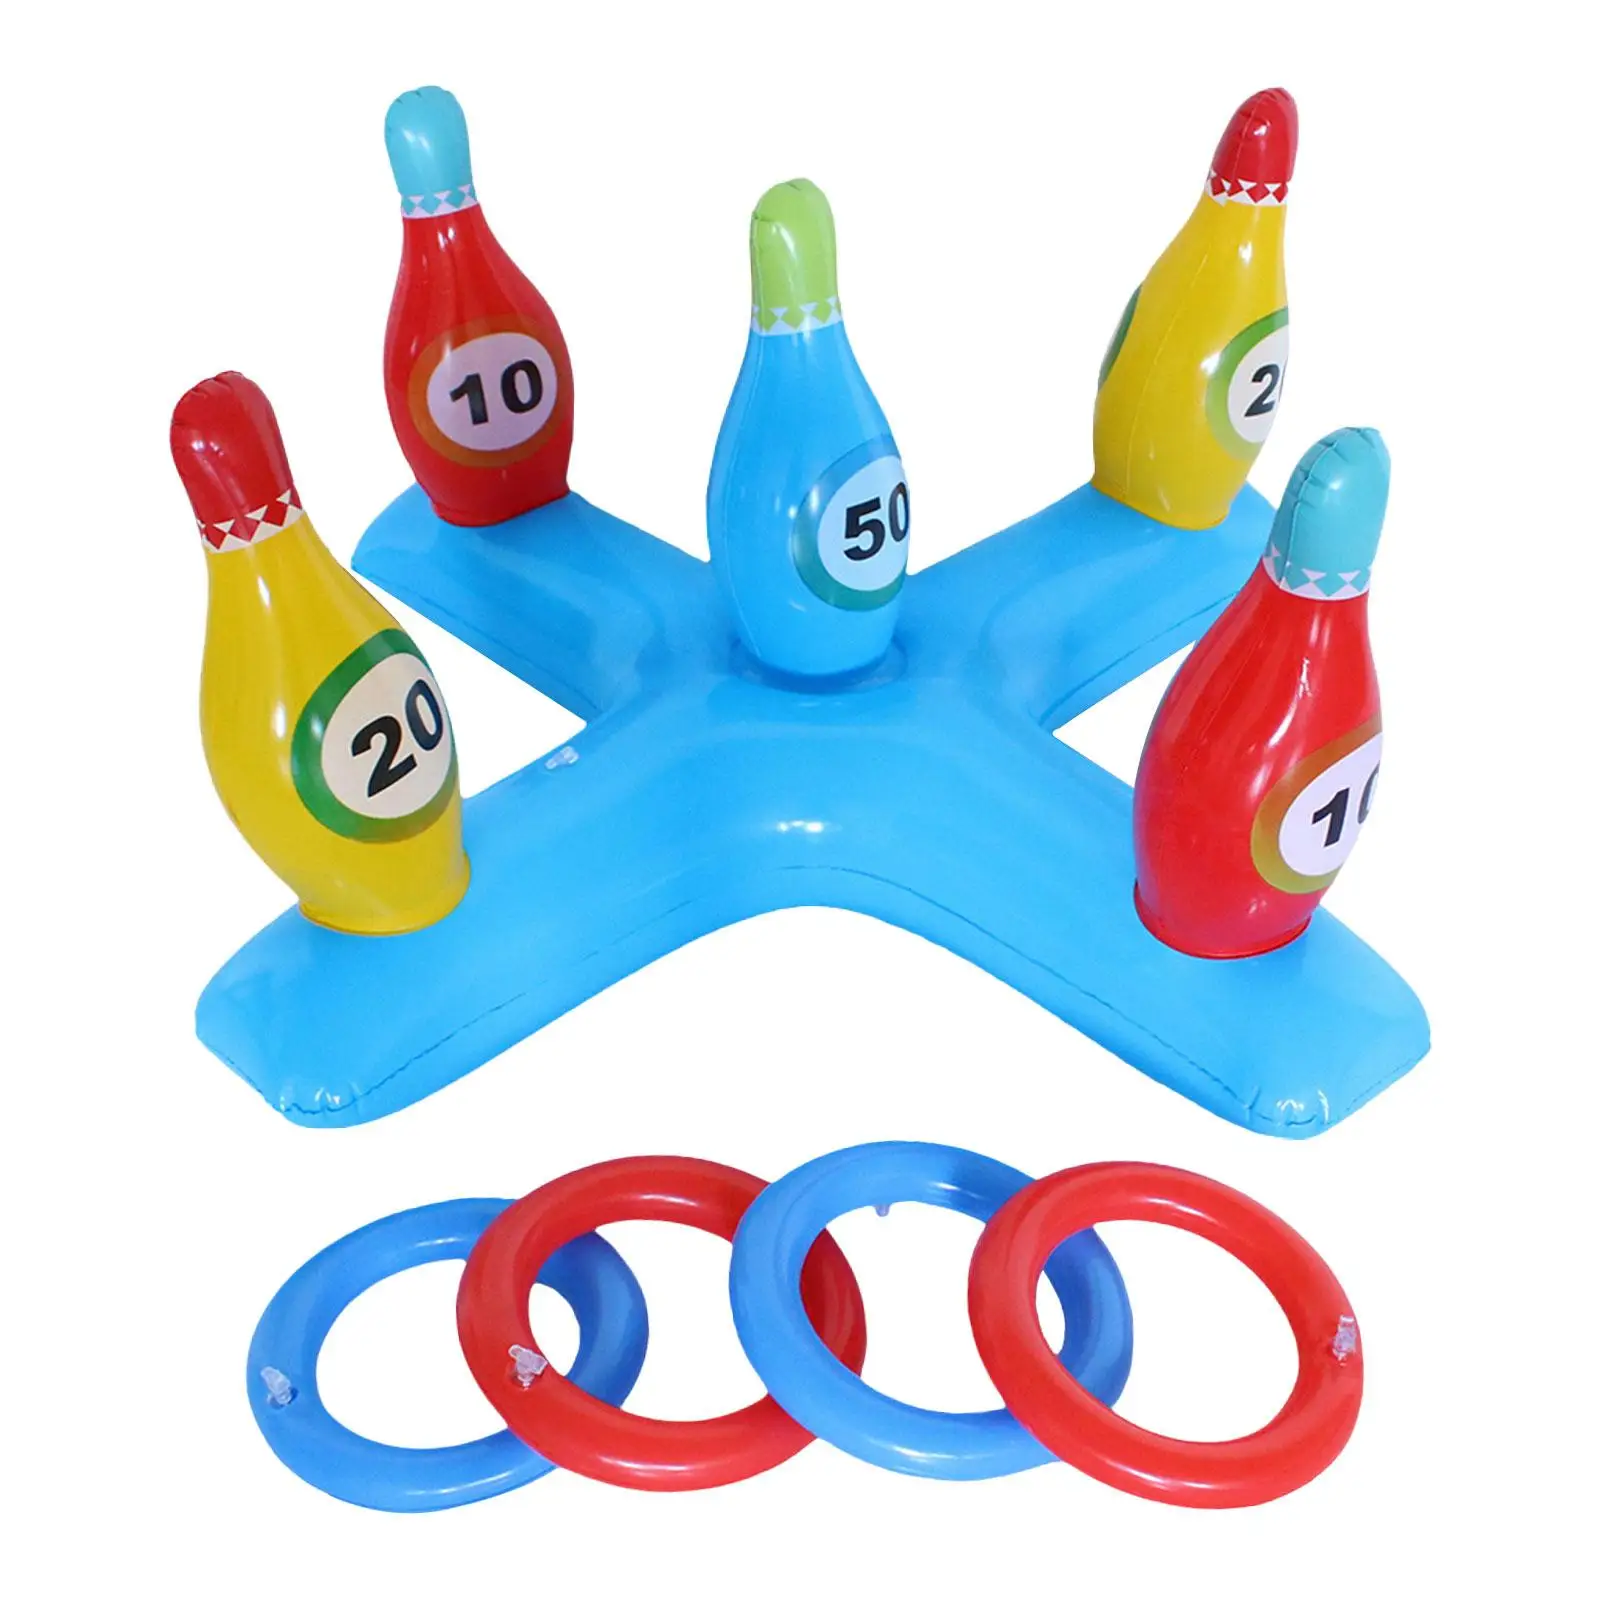 Ring Toss Game Set Cross Game Throwing Ring Set for Outdoor Party Activity